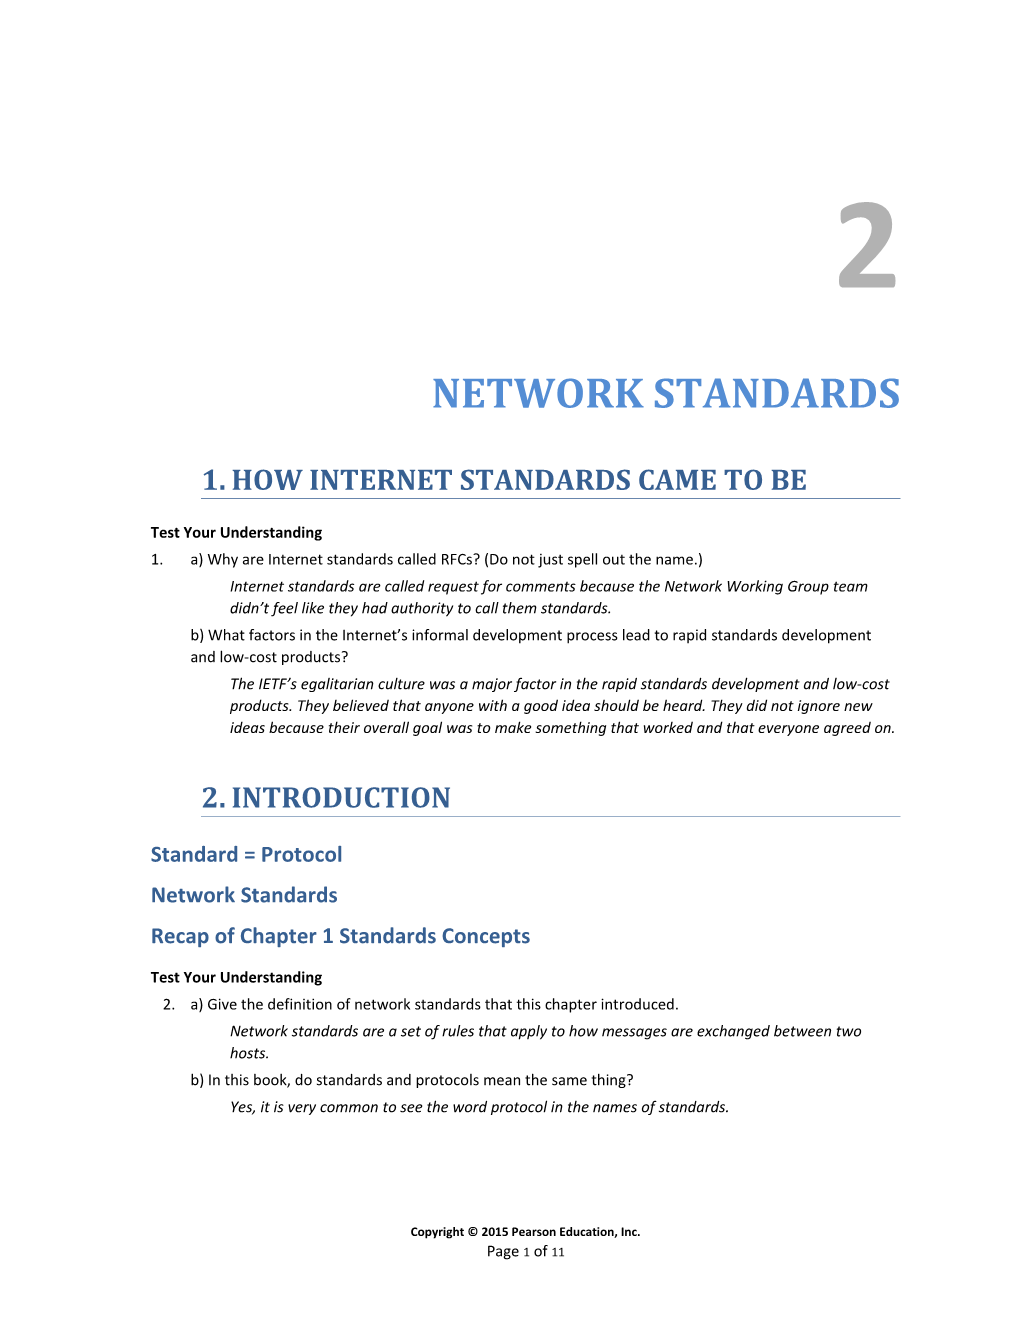 How Internet Standards Came to Be